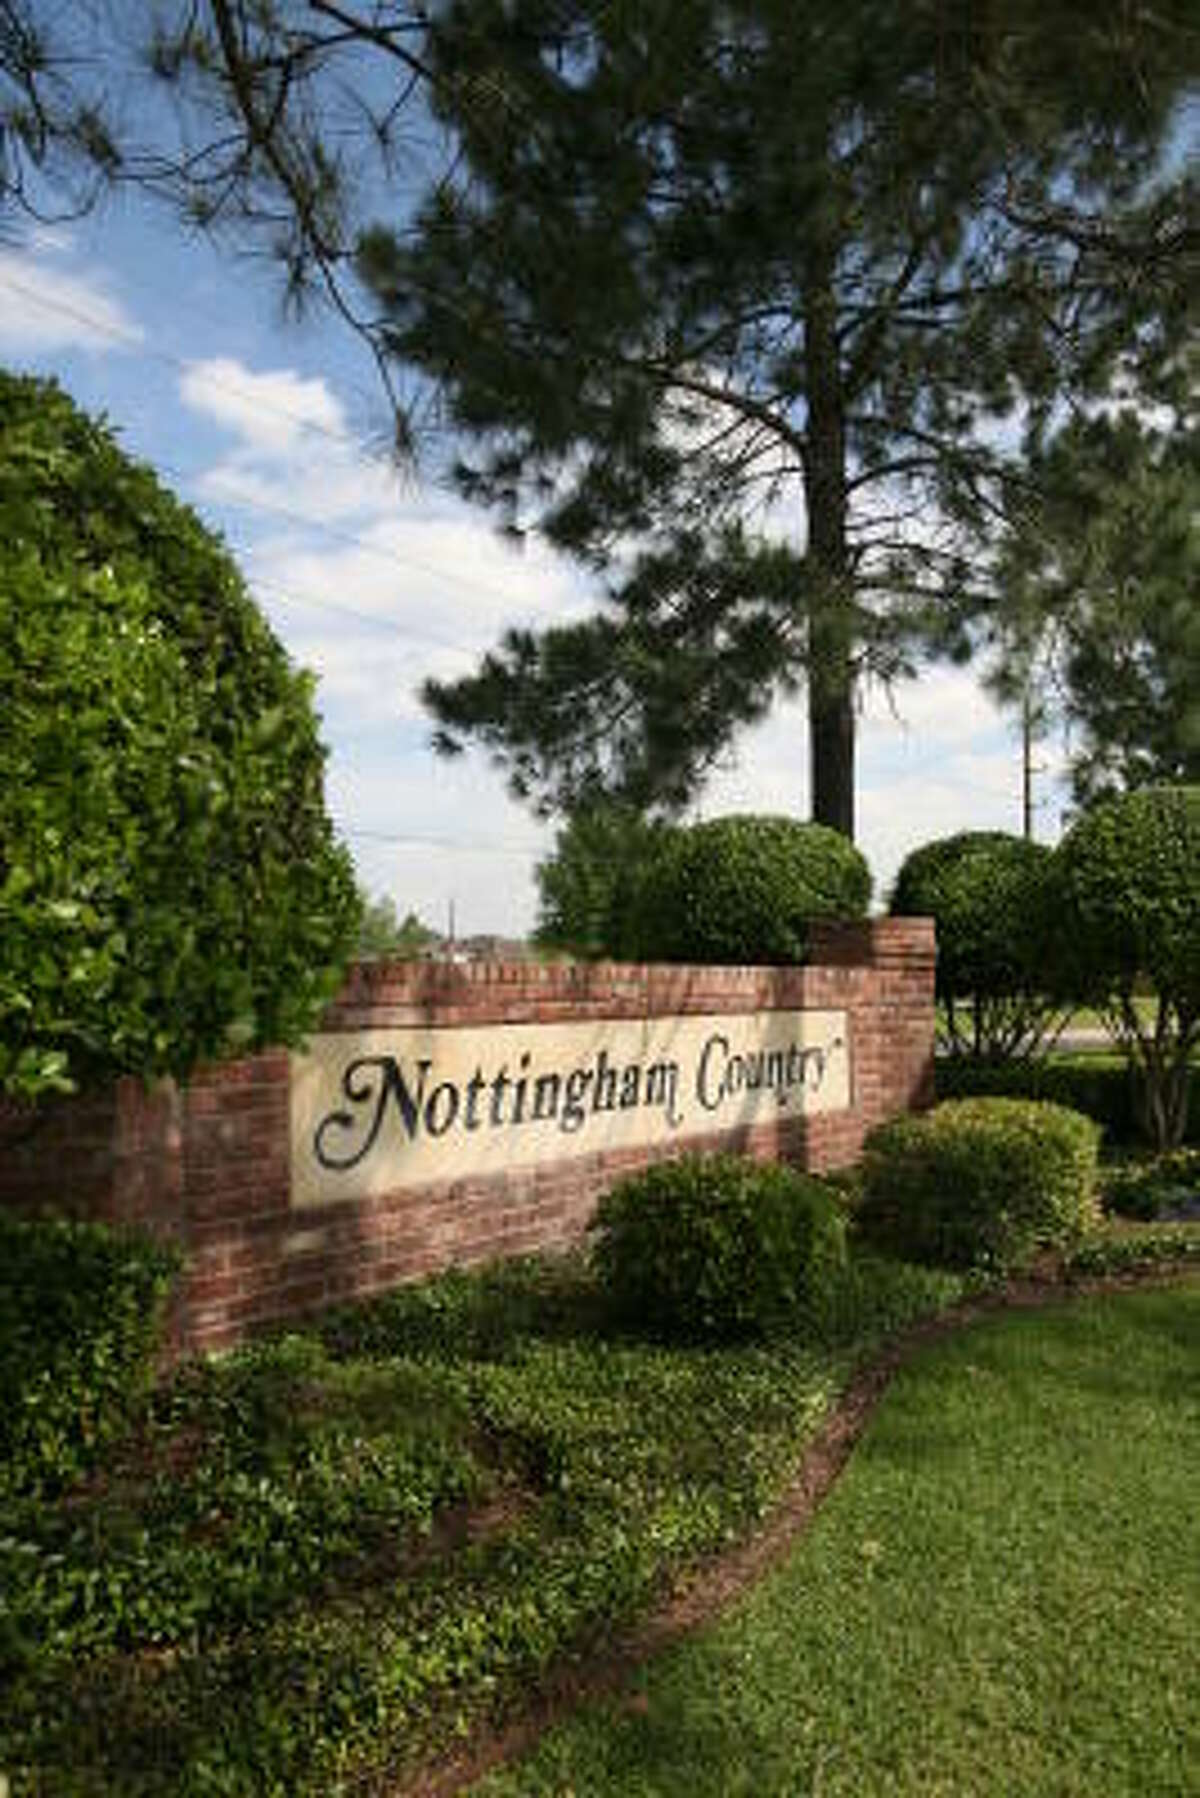 Nottingham Country was developed in the mid-1970s and 1980. Many who bought during that period say their investment was — and still is — a sound one.